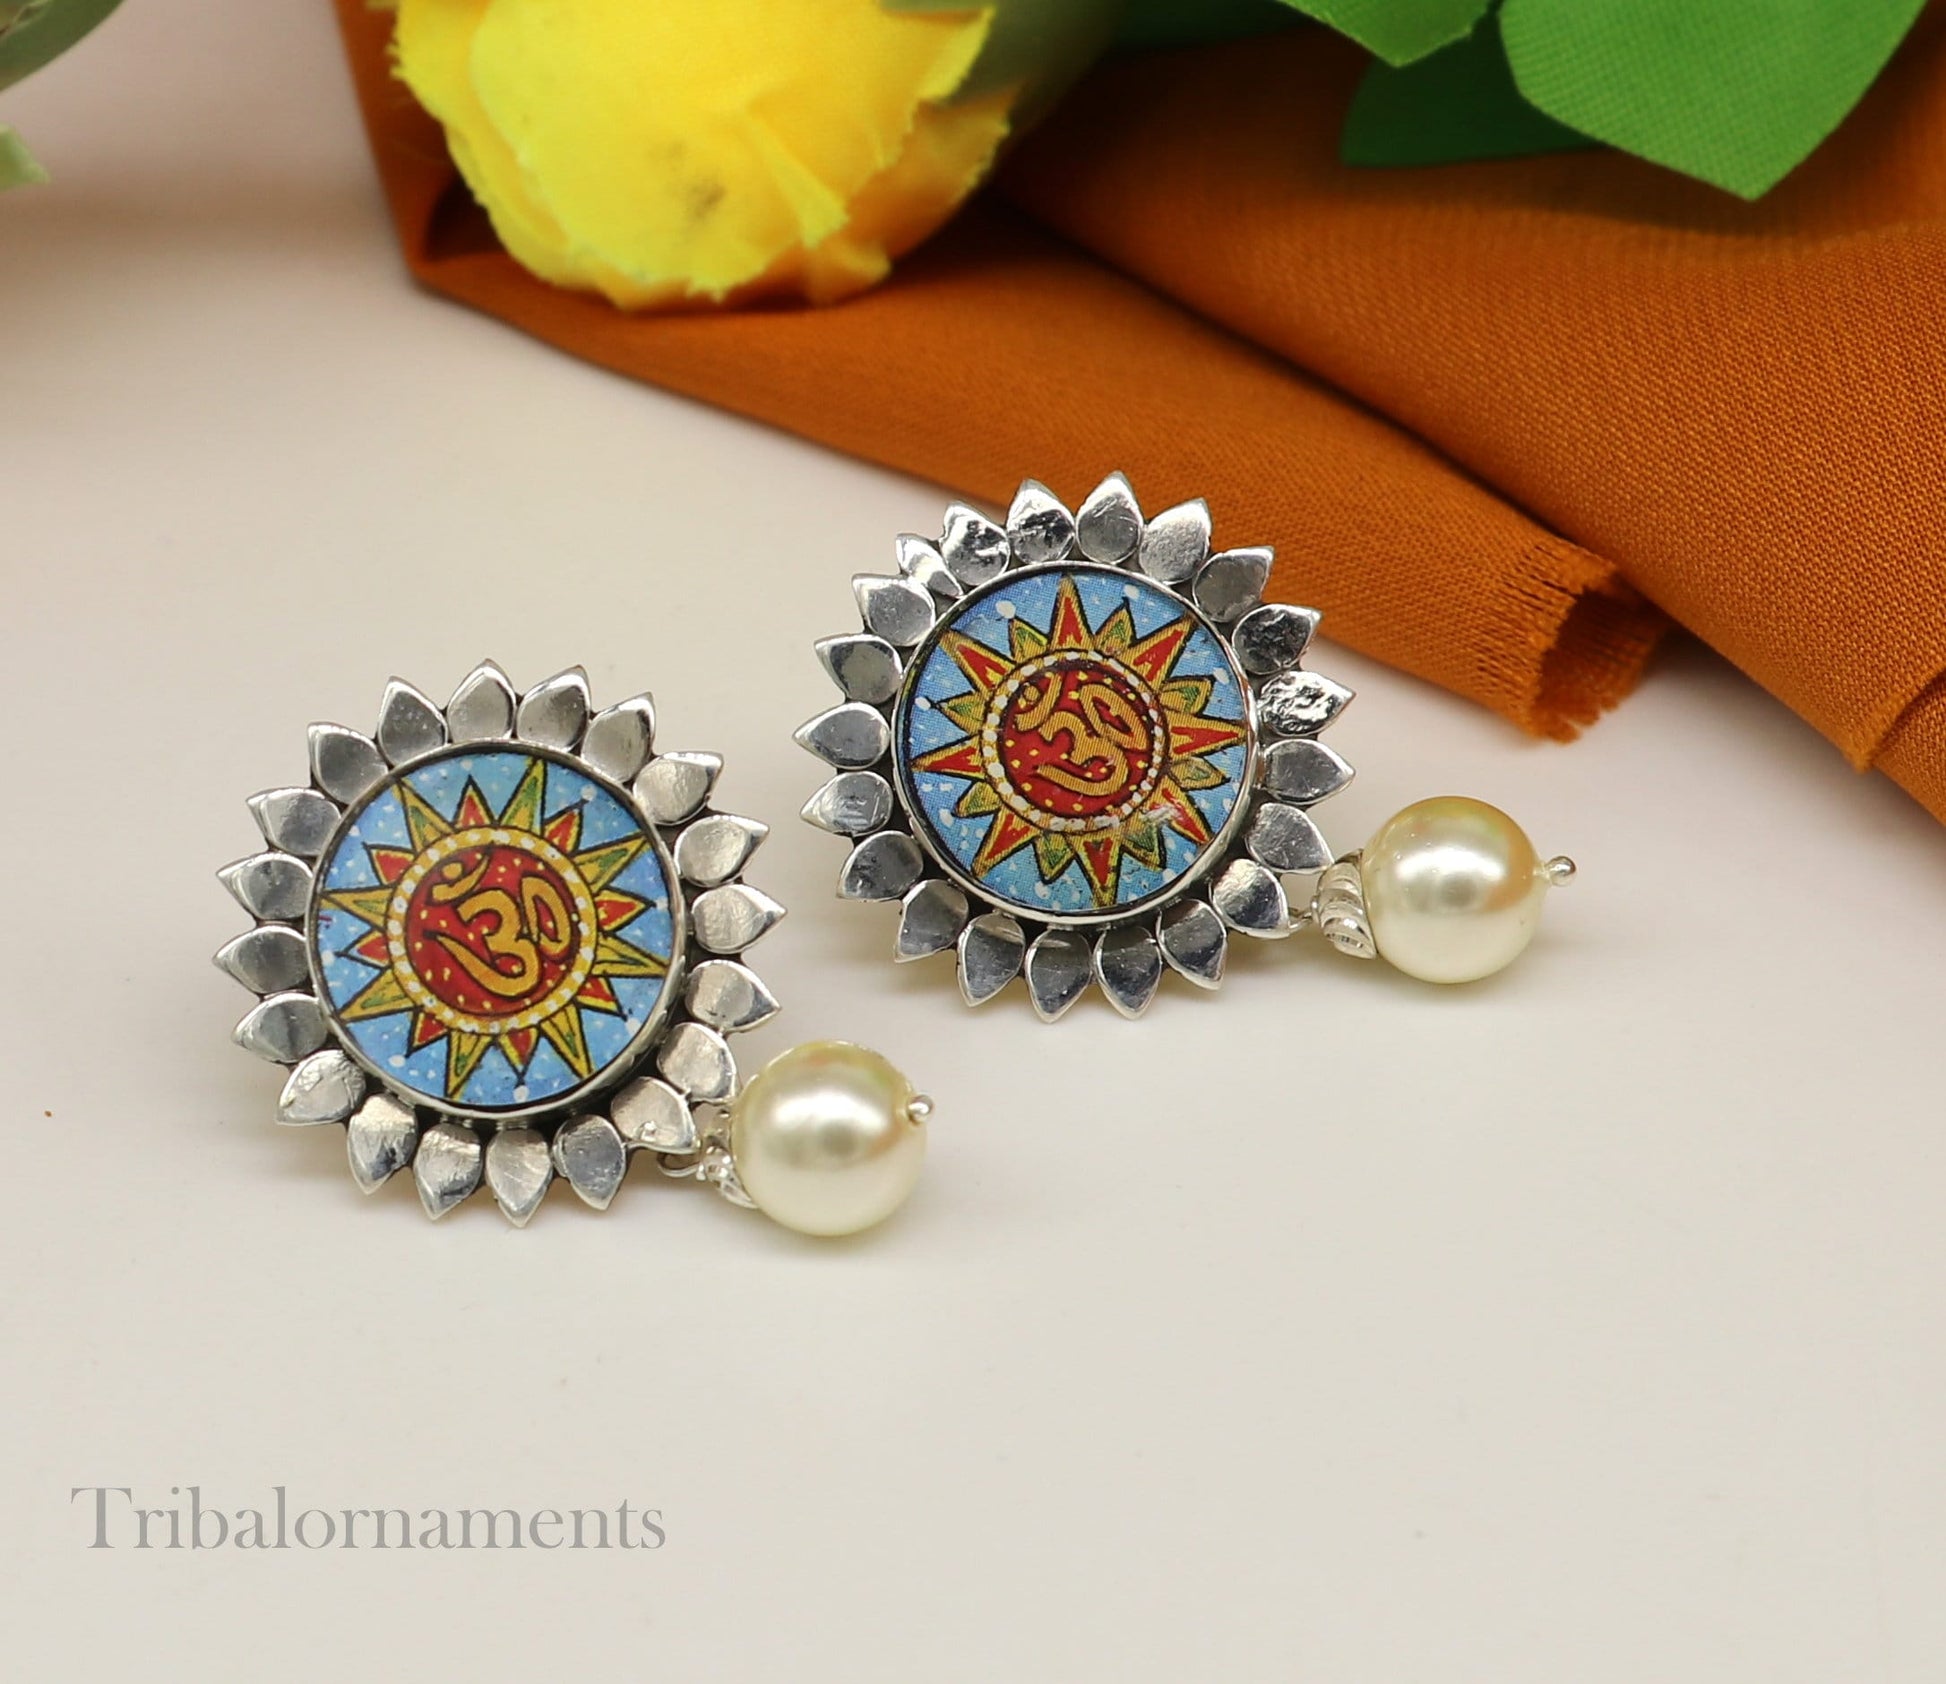 92.5 Sterling Silver Divine Mantra 'om' Aum' Stud earring Hand Painted Miniature Art photo Glass Framed ethnic stylish jewelry ear938 - TRIBAL ORNAMENTS